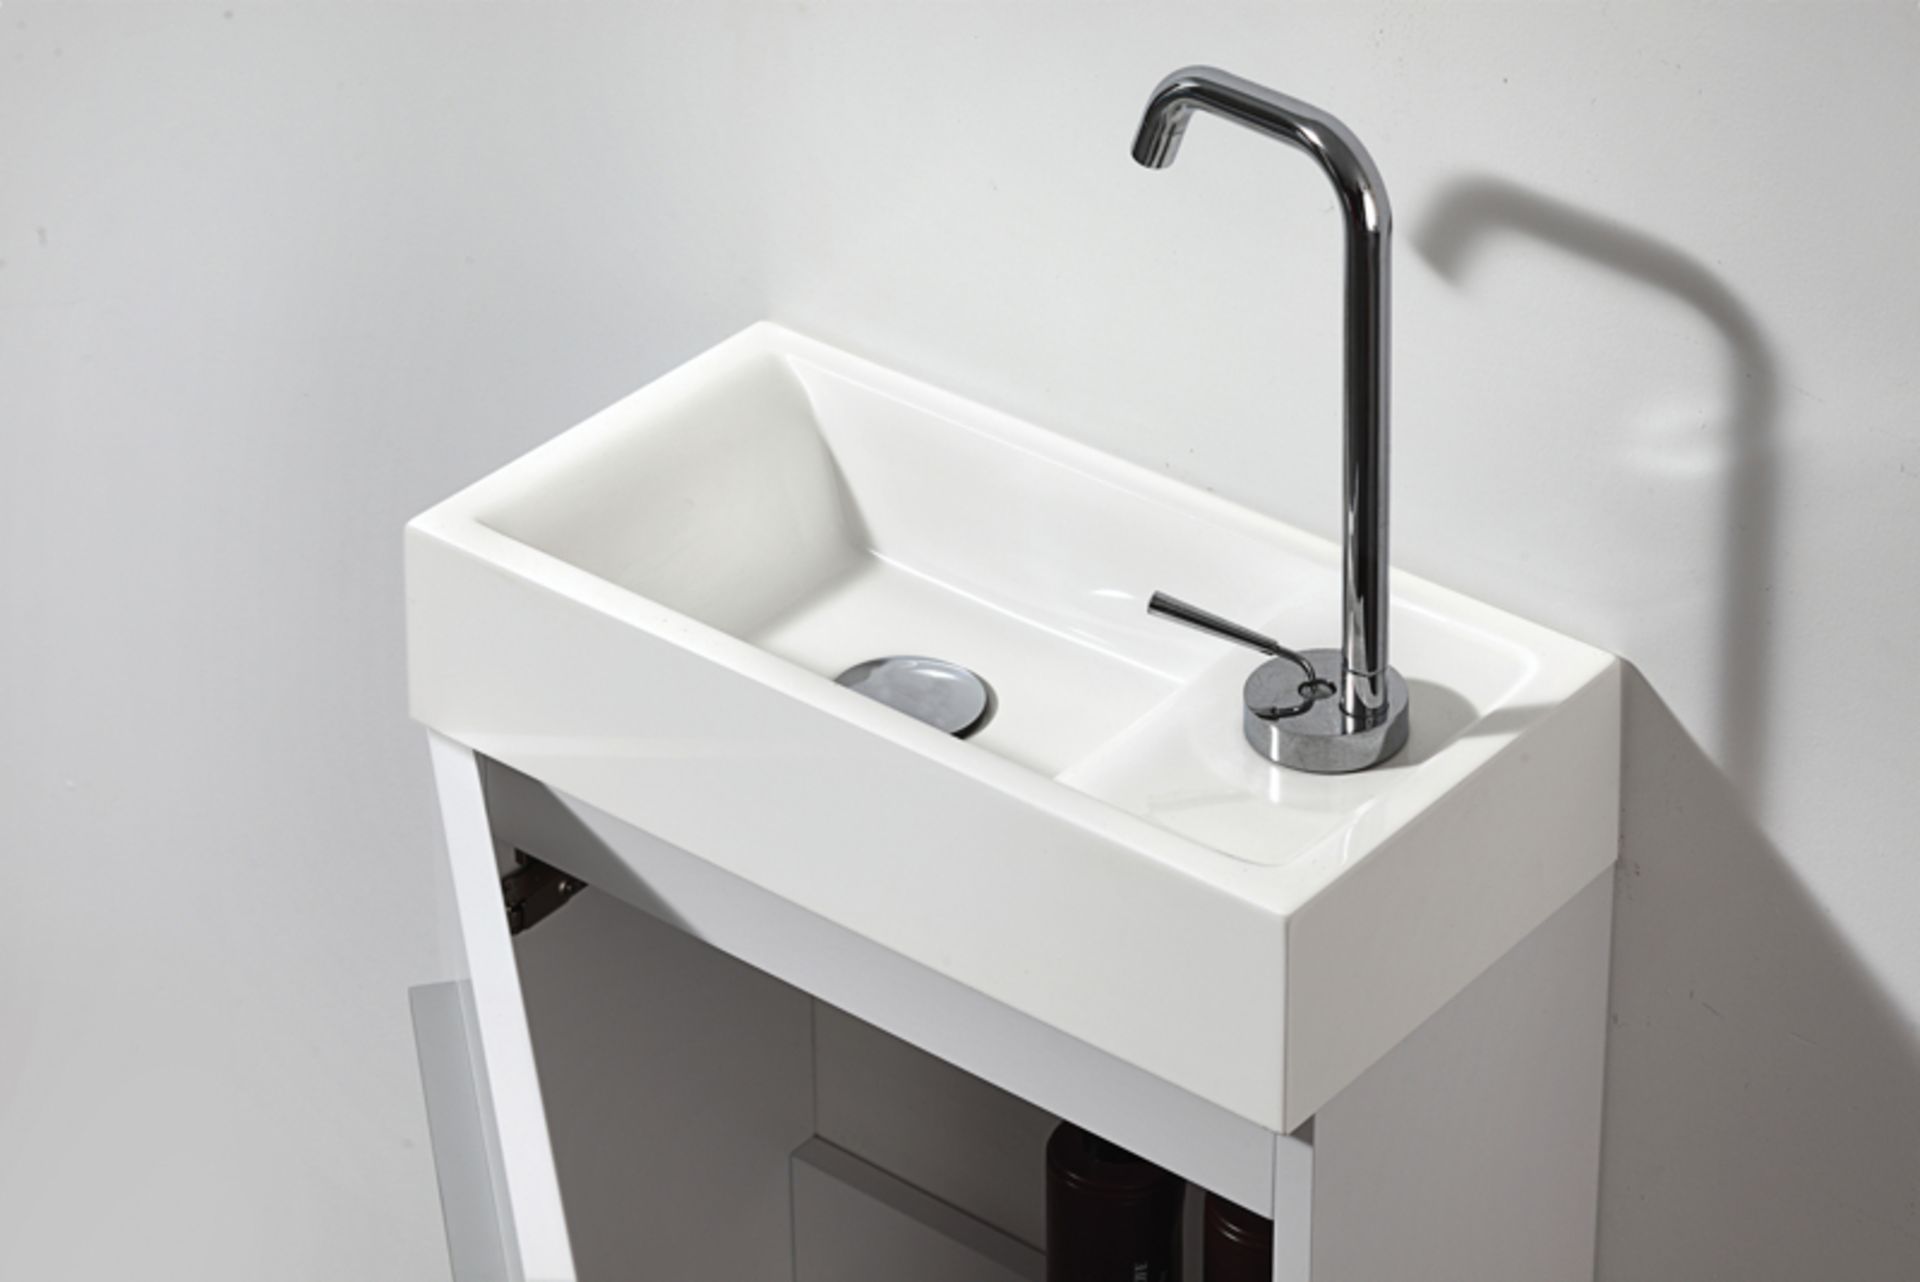 1 x MarbleTECH Mini Mount - A-Grade - Basin and Base Unit - Ref:ABS23-046 & AWS33-046 - CL170 - Loca - Image 2 of 3